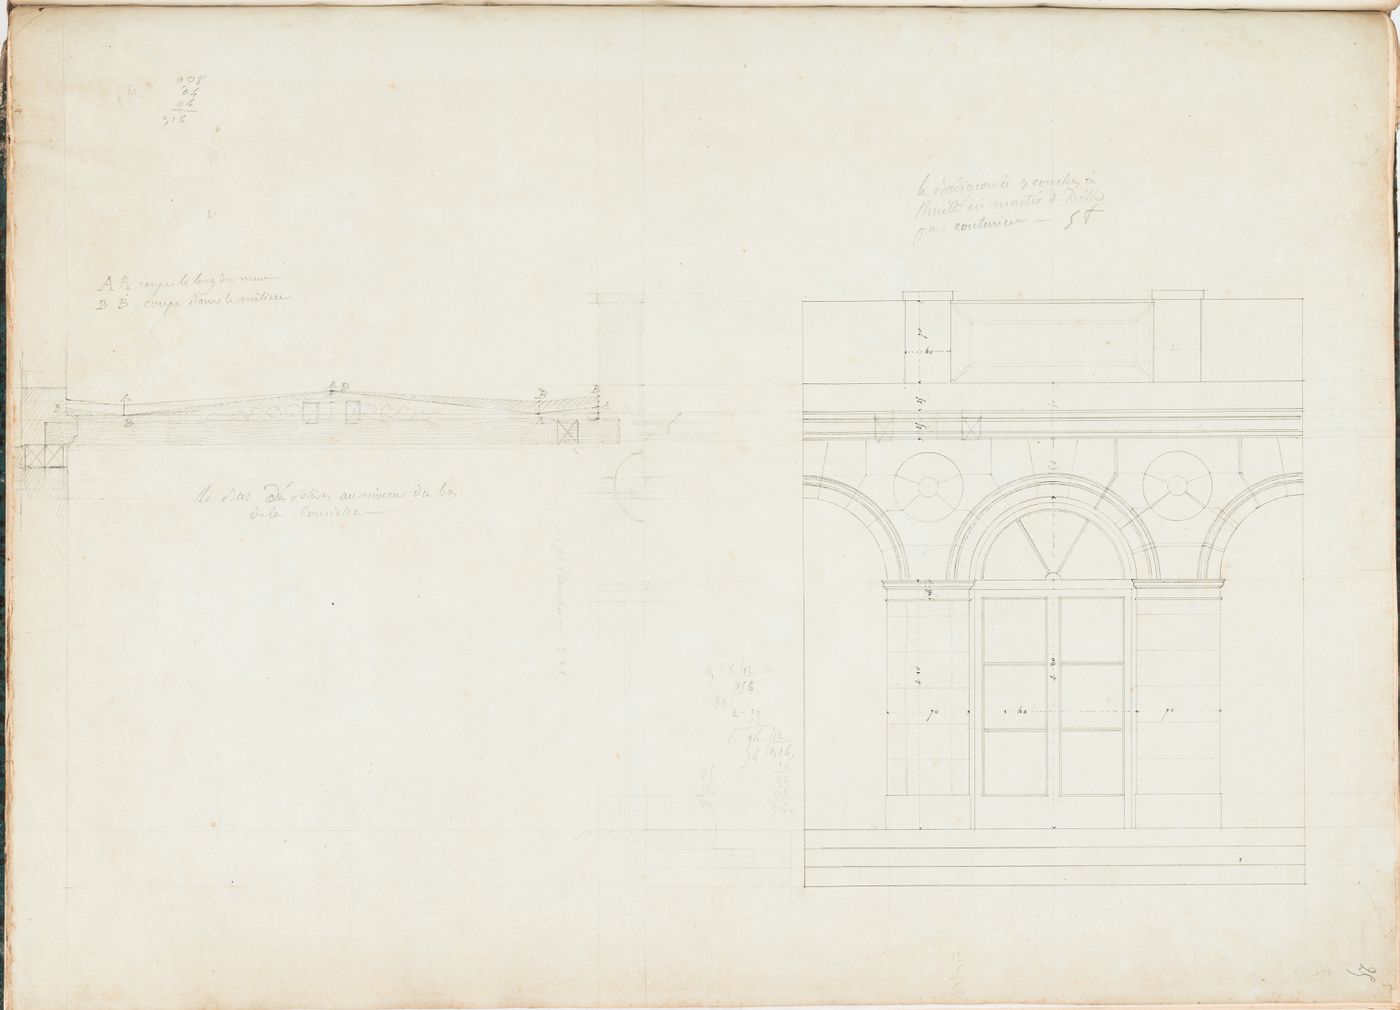 Project for the conversion of Hôtel Soyécourt, Paris, into barracks: Partial elevation and section for an arcade